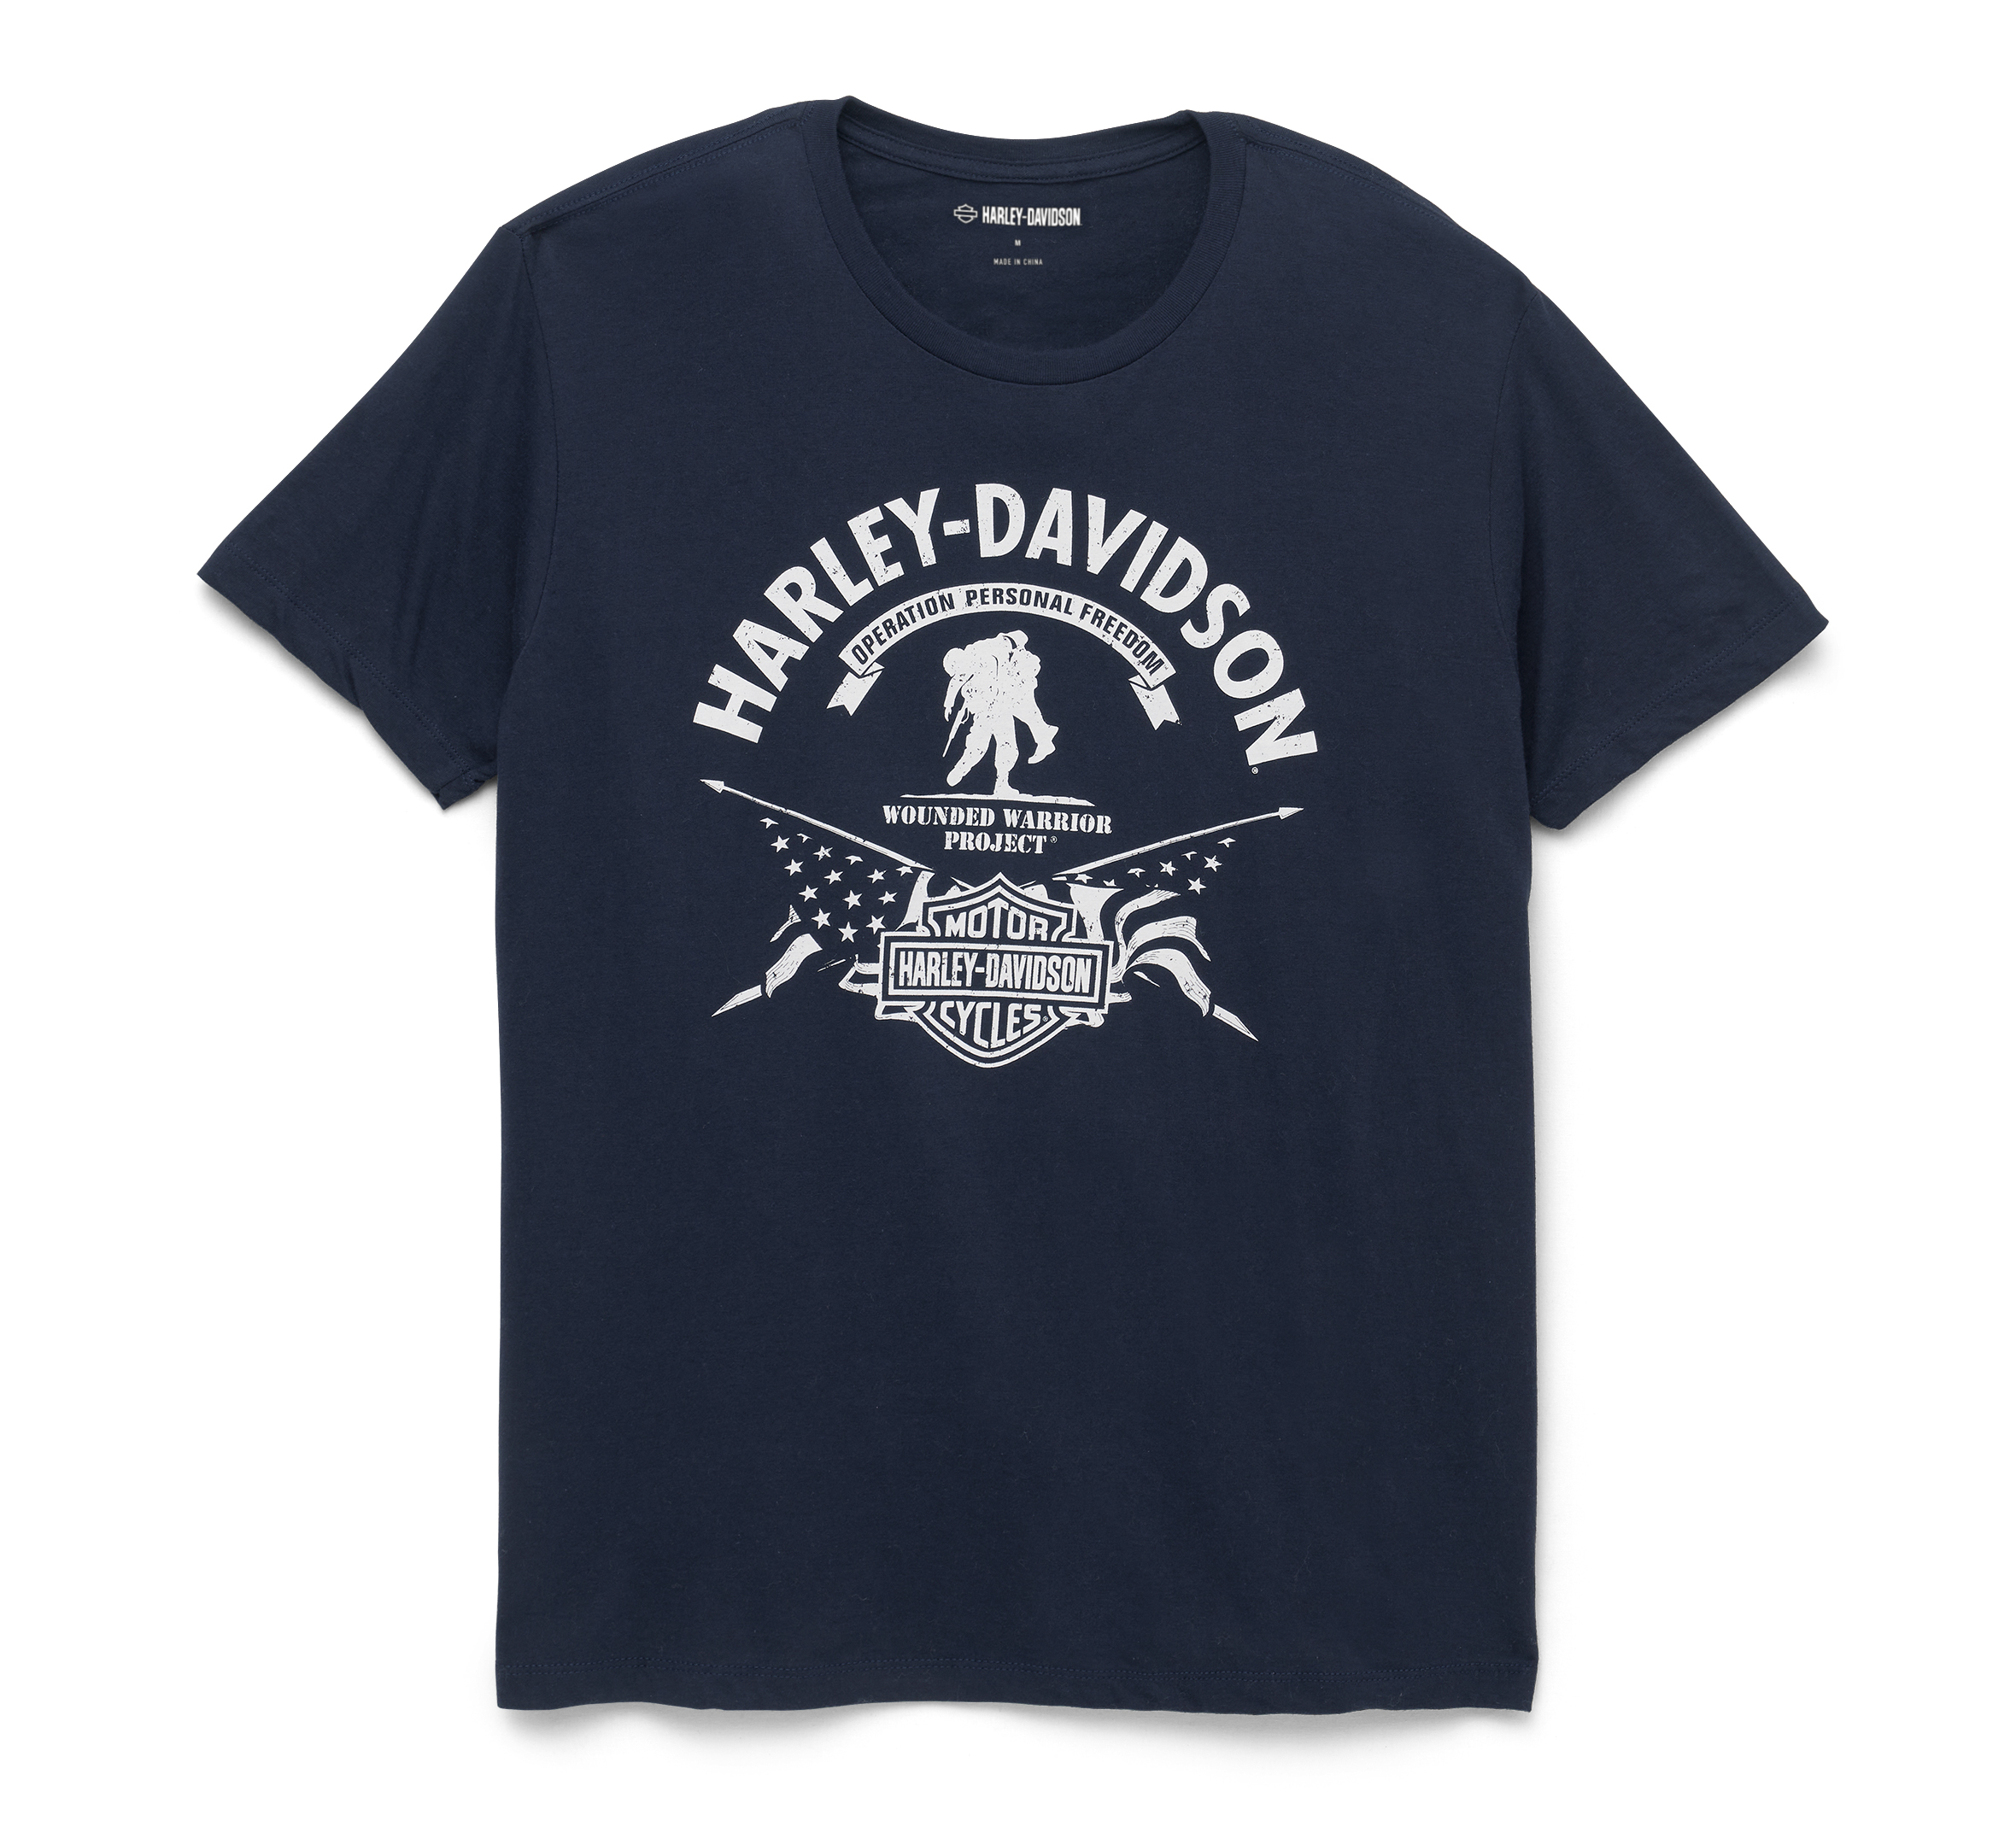 Men's Harley-Davidson Wounded Warrior Project Stars & Stripes Tee ...